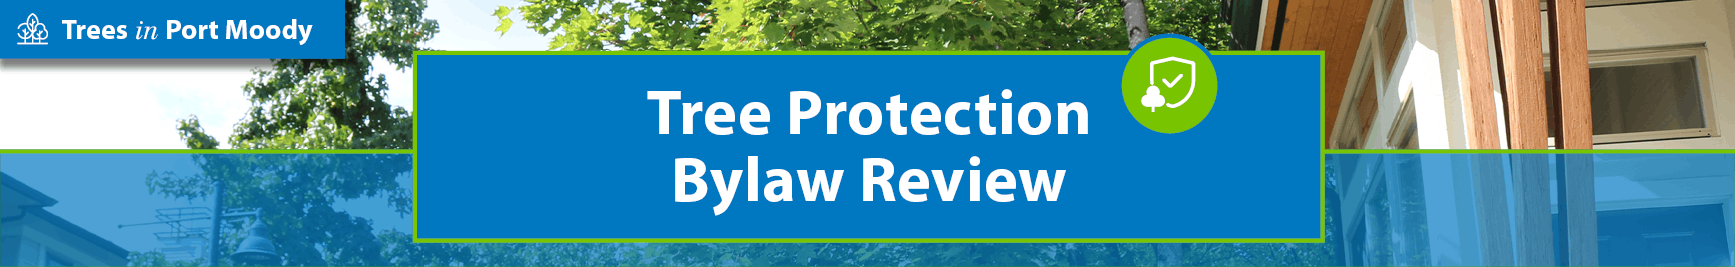 Tree protection bylaw review